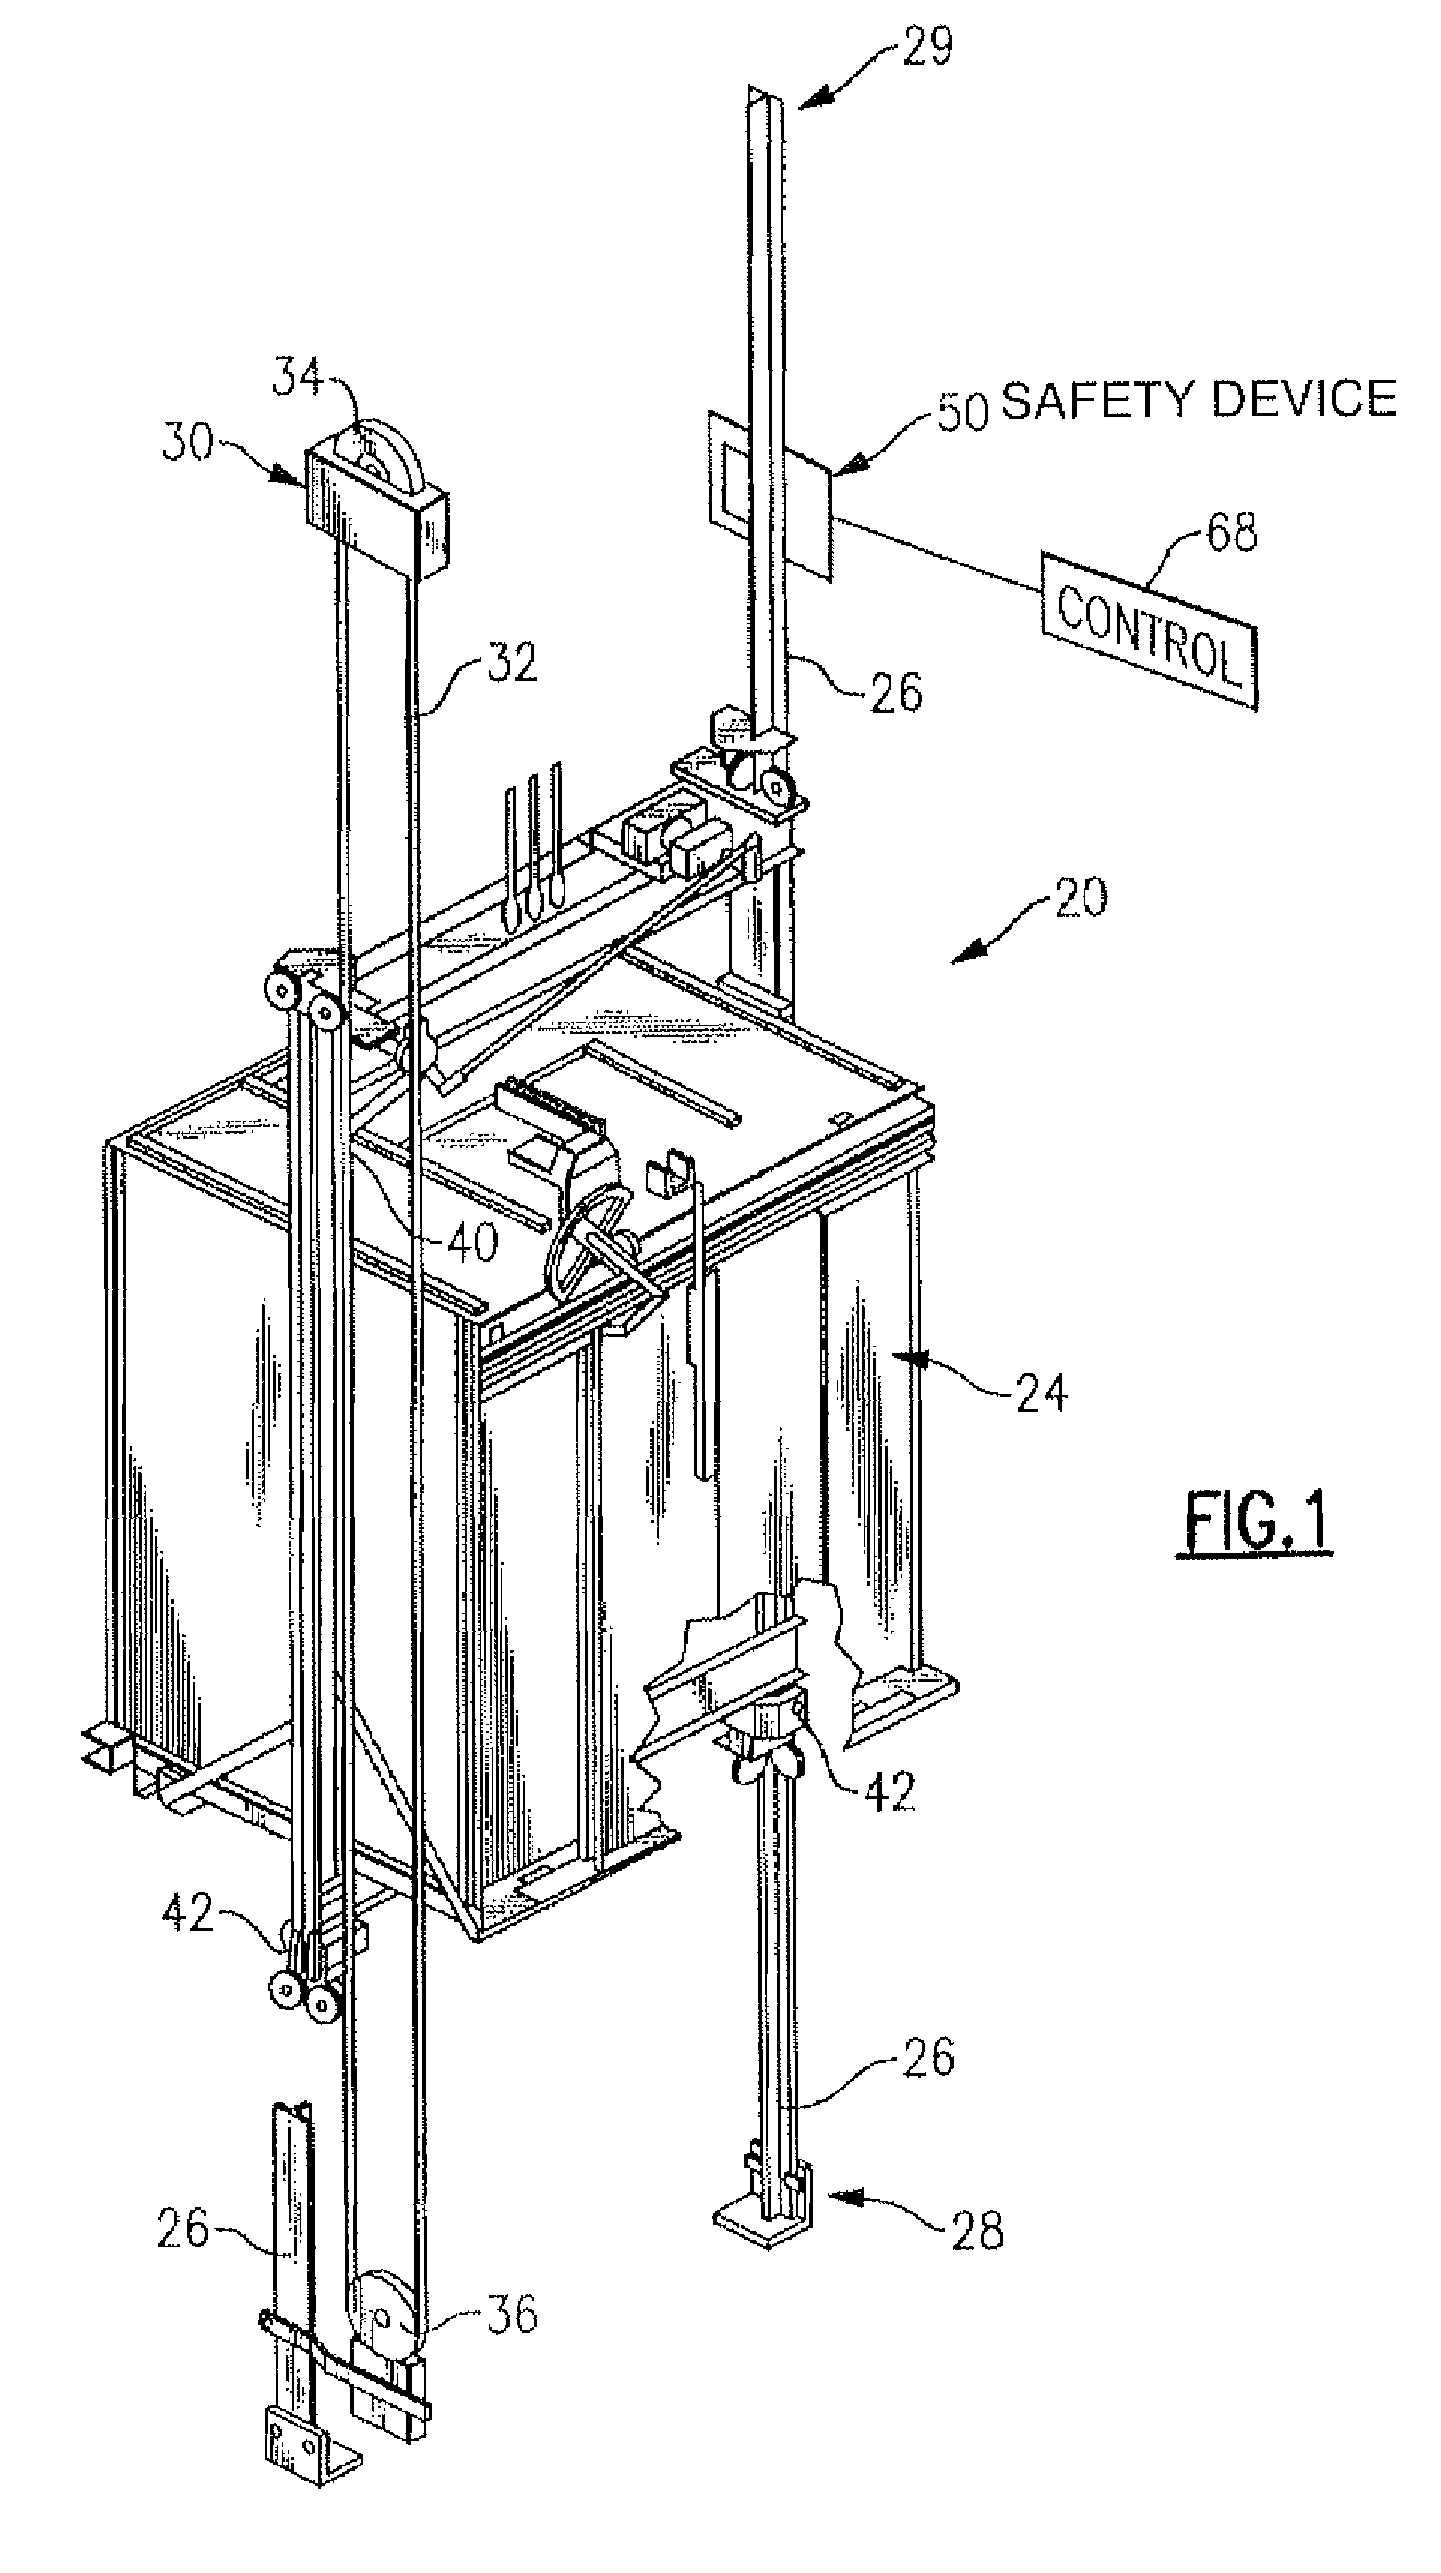 Safety device for use in an elevator system including a triggering member for activating a safety brake